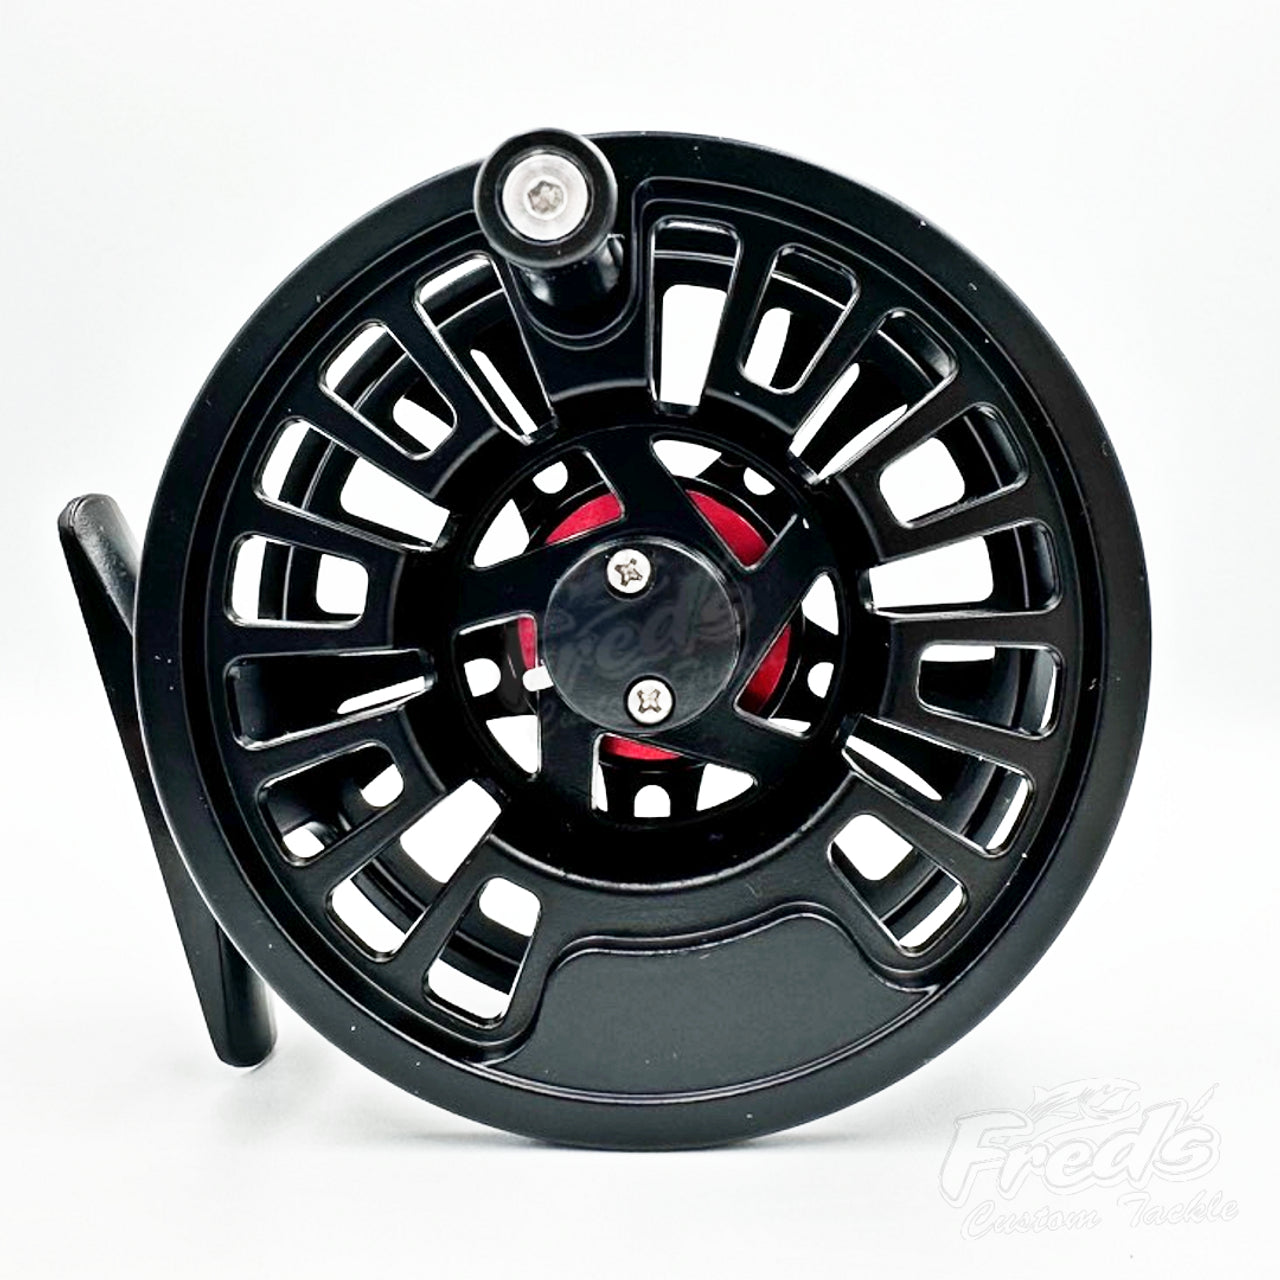 DRAGONFLY VENTURE 3 FLY REEL